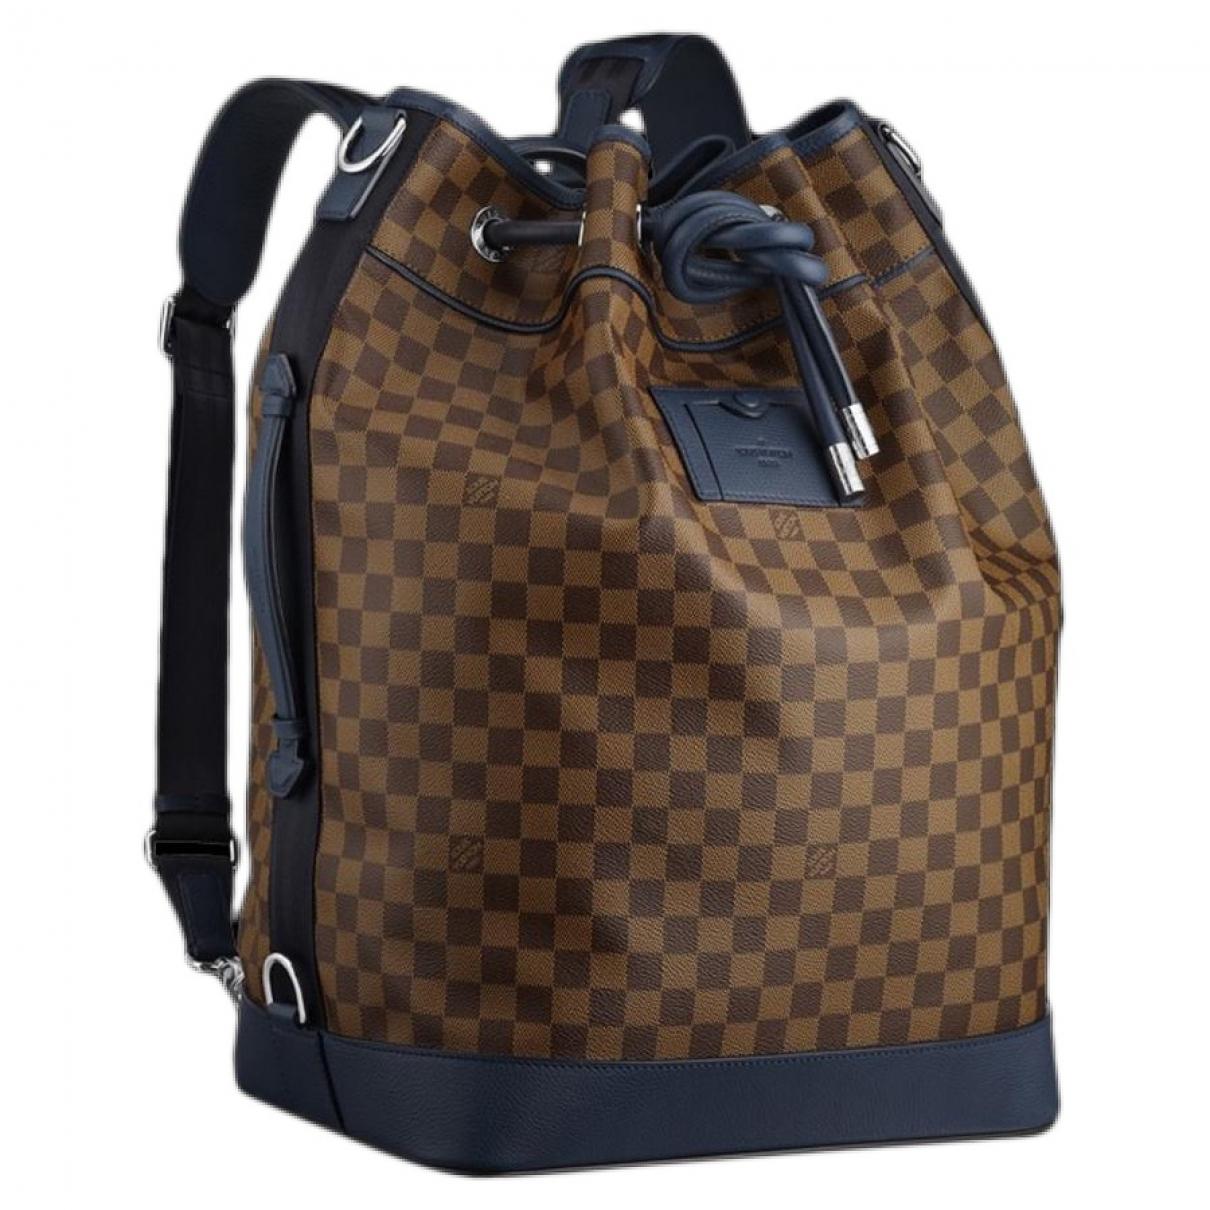 Lyst - Louis Vuitton Backpack in Brown